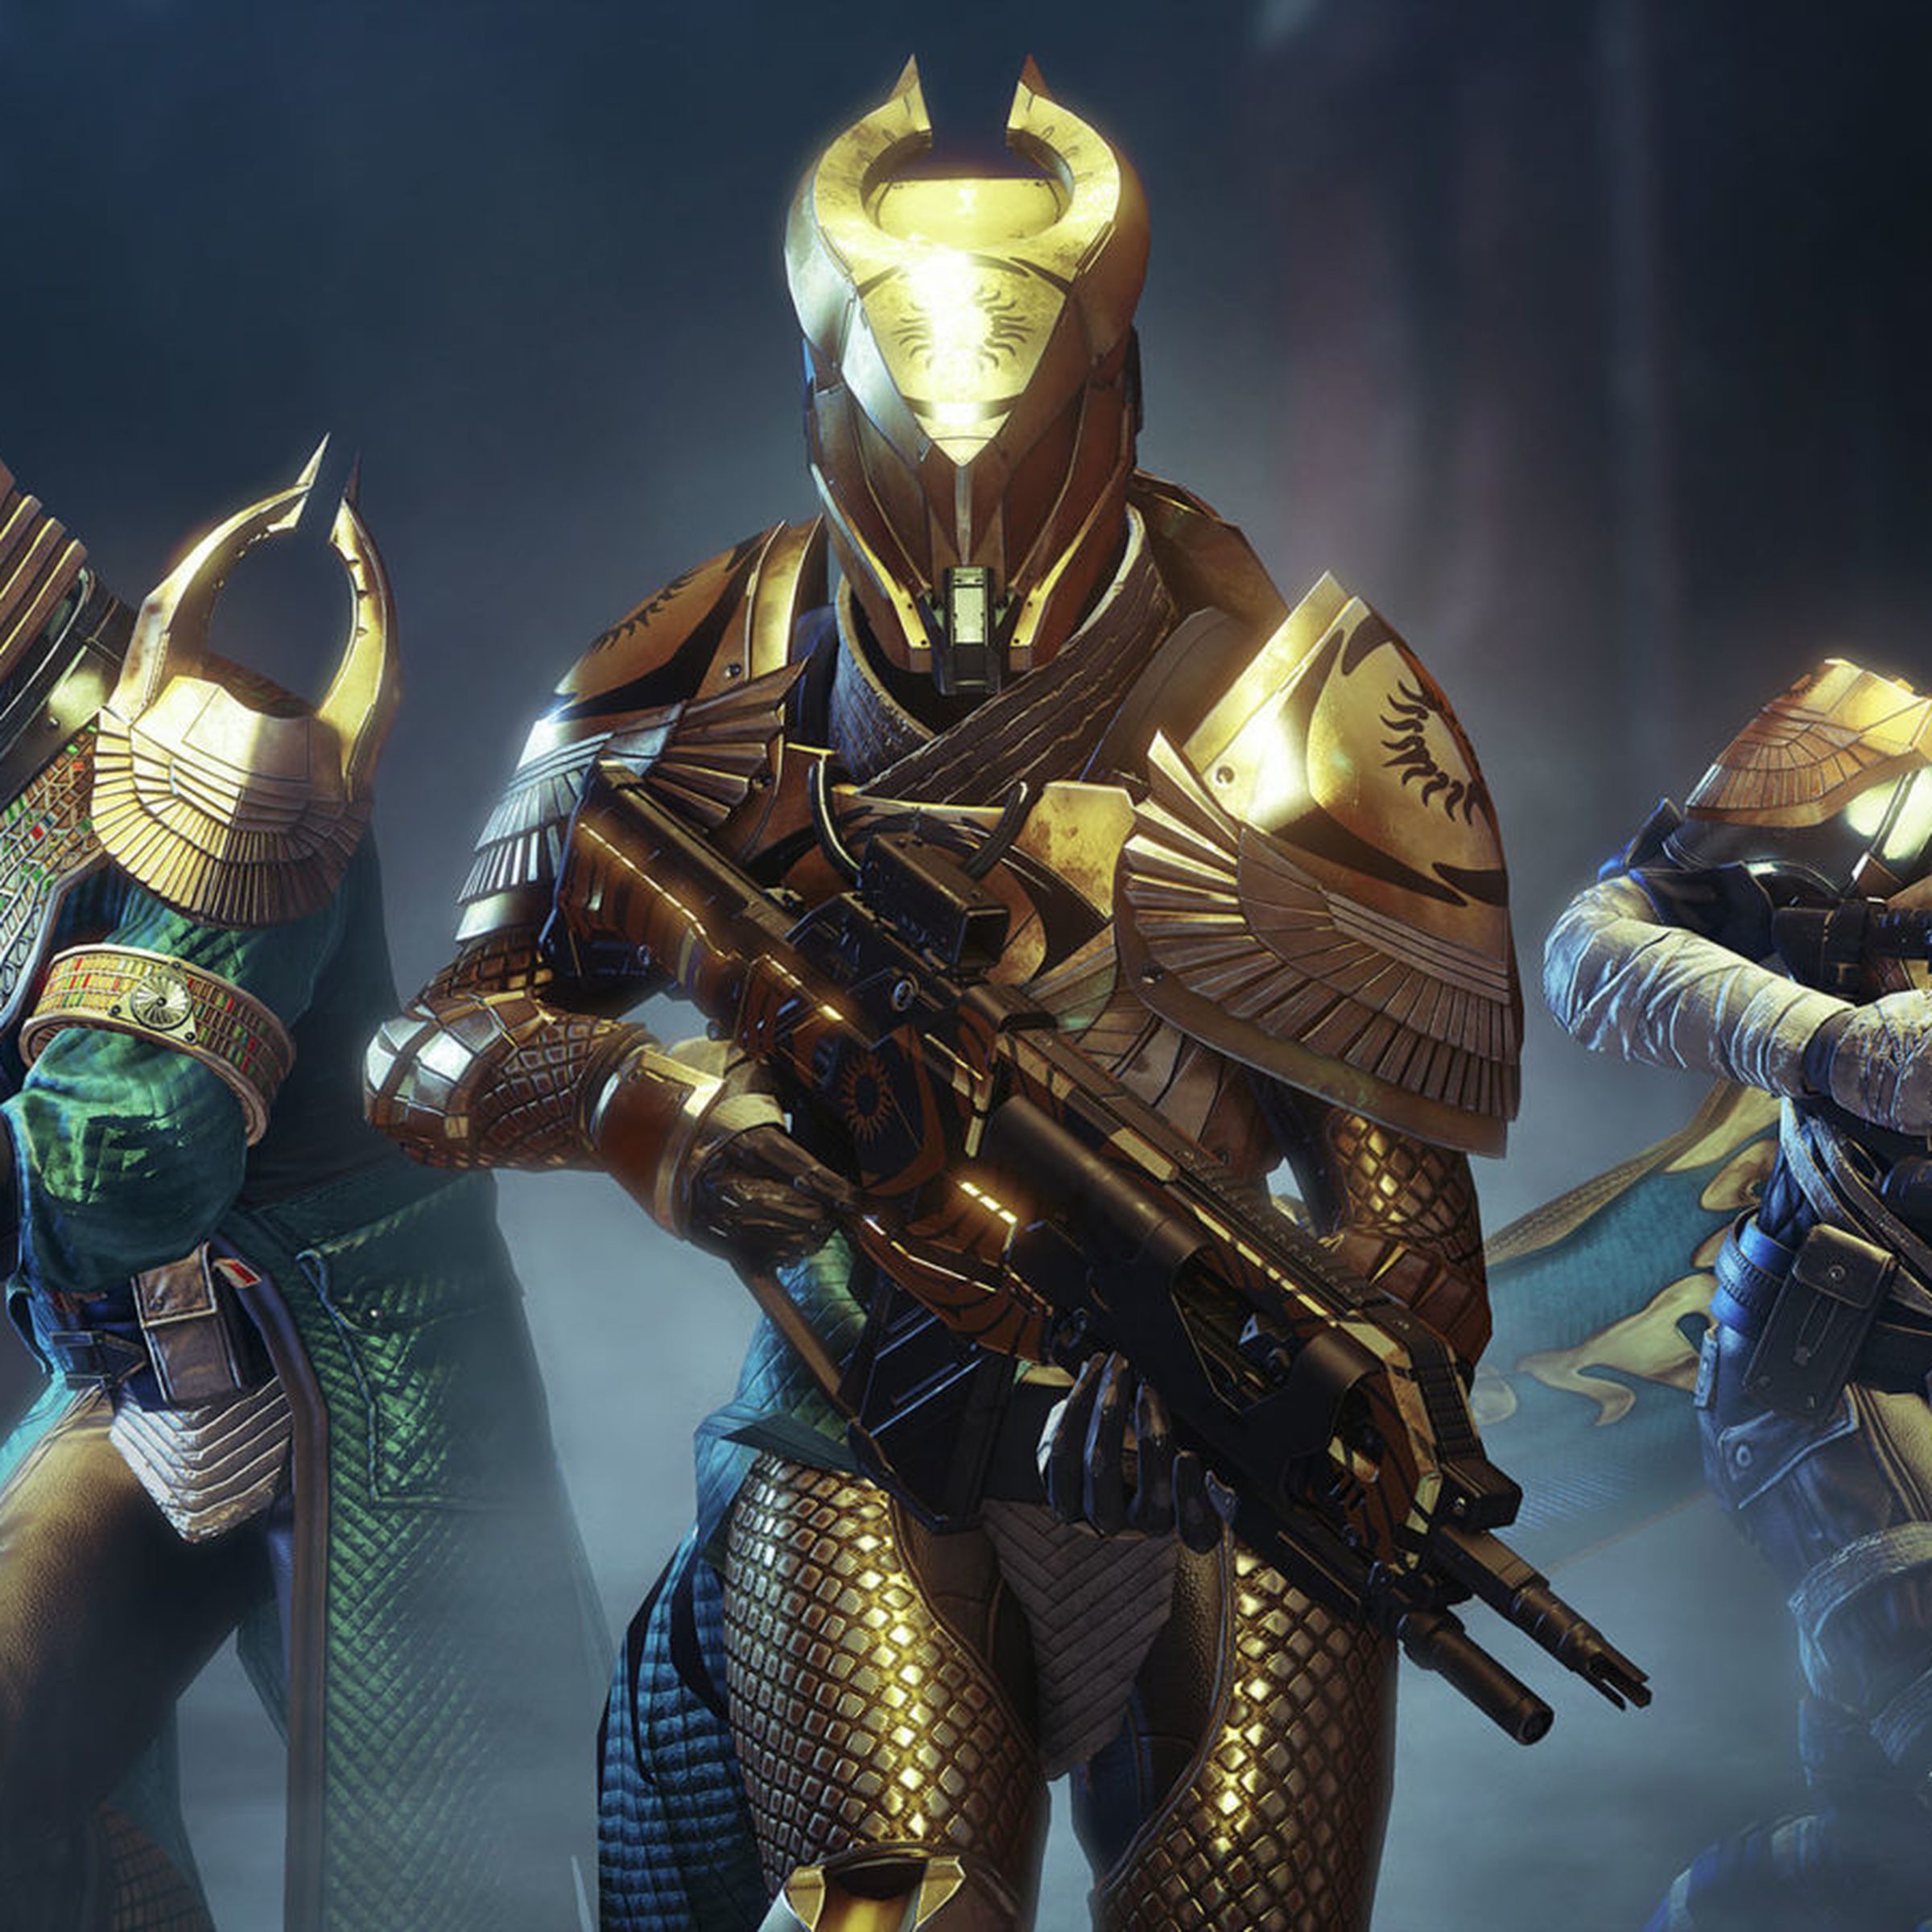 Destiny 2 characters in Trials of Osiris